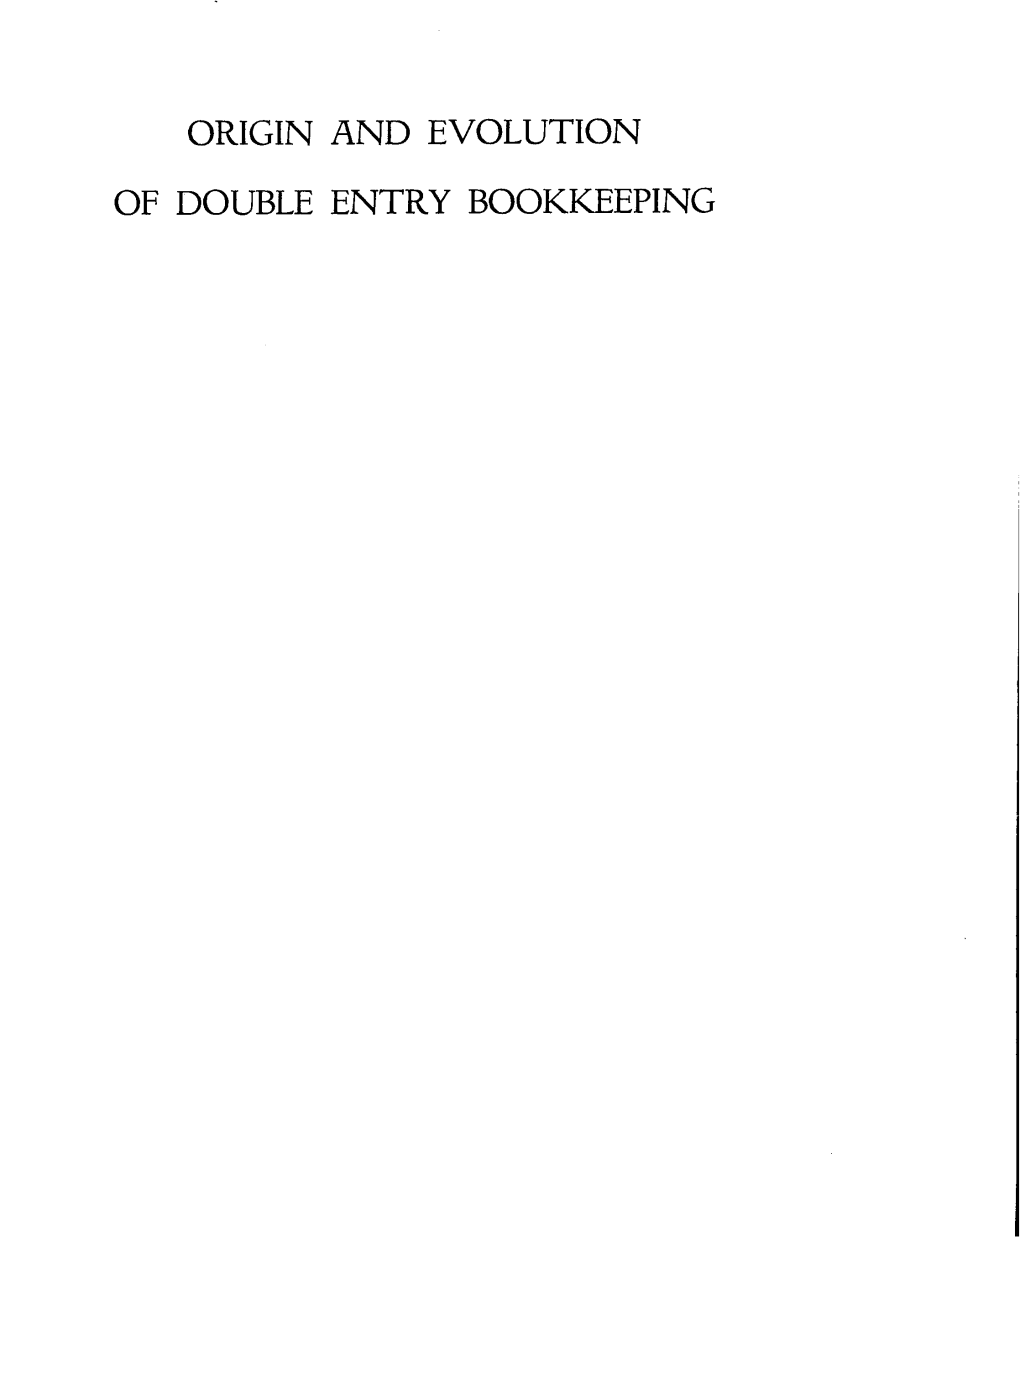 Origin and Evolution of Double Entry Bookkeeping